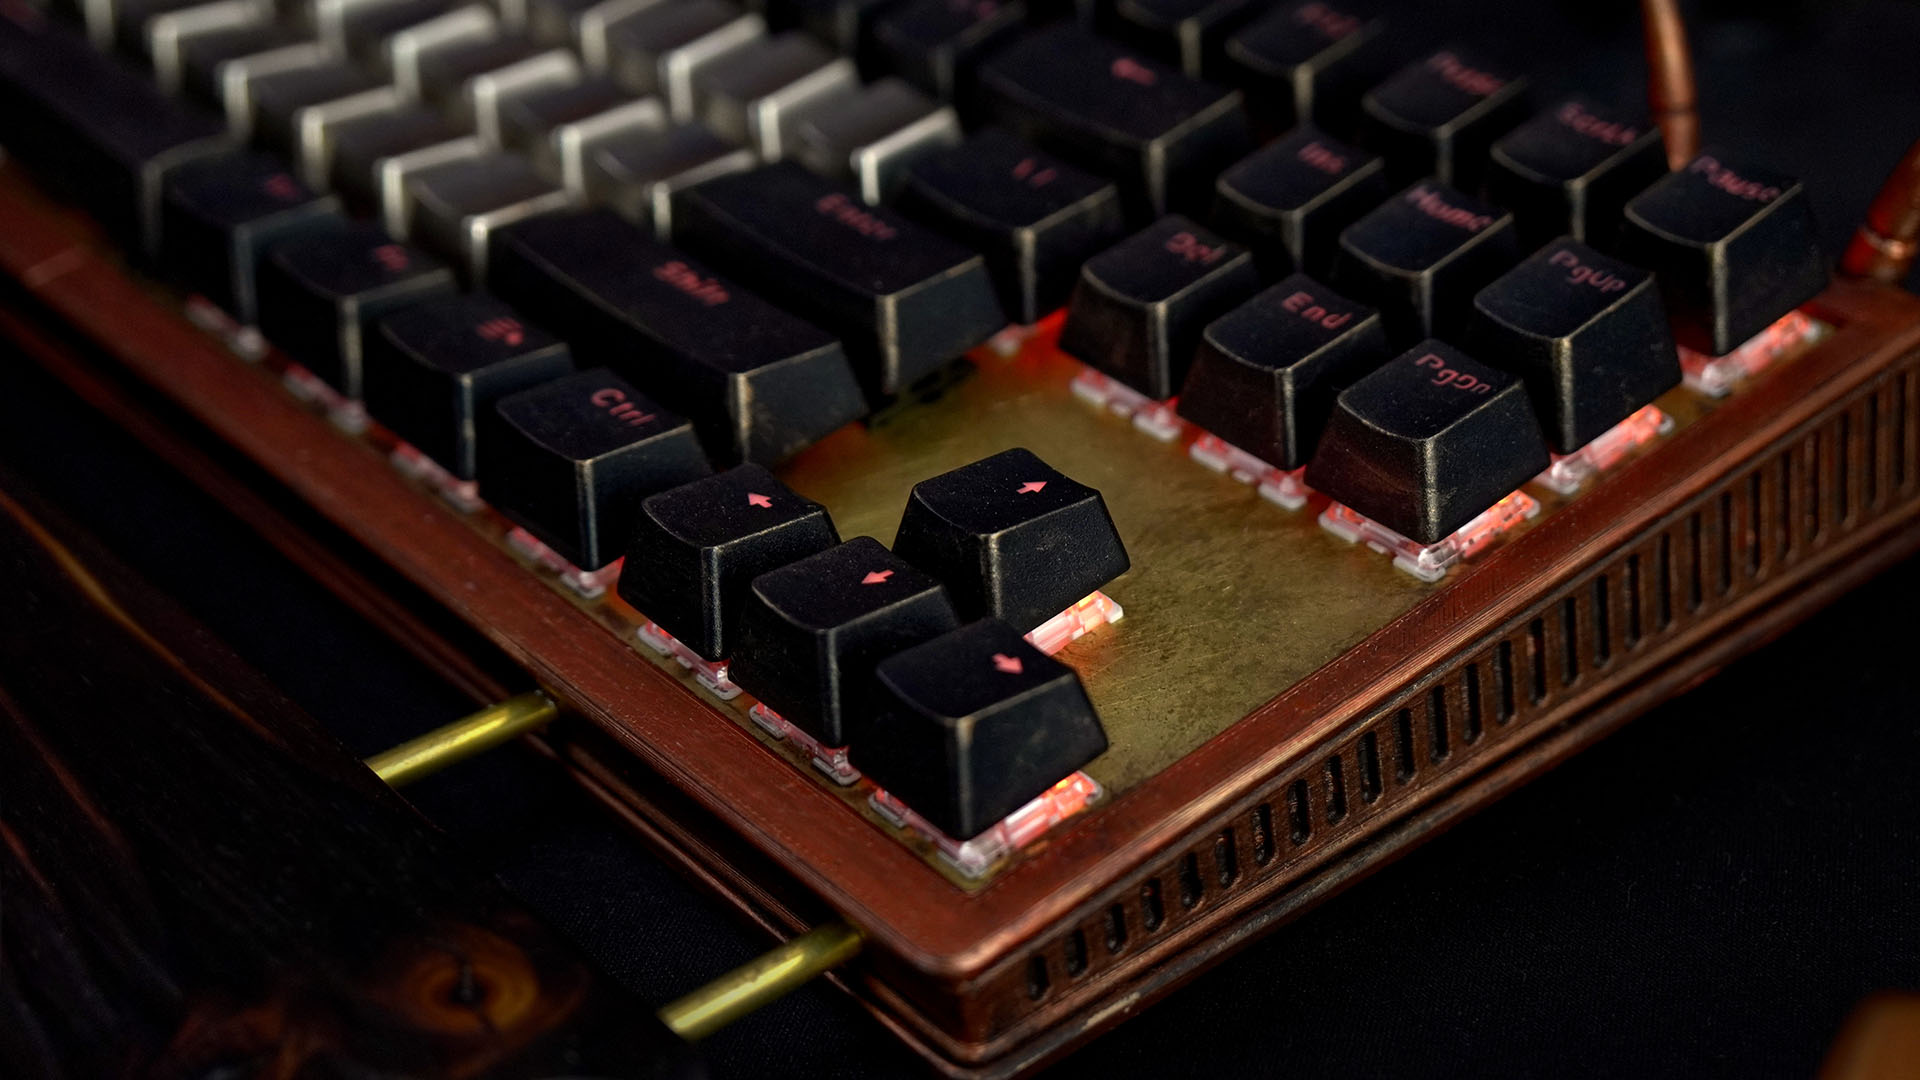 The custom keyboard for the steampunk PC